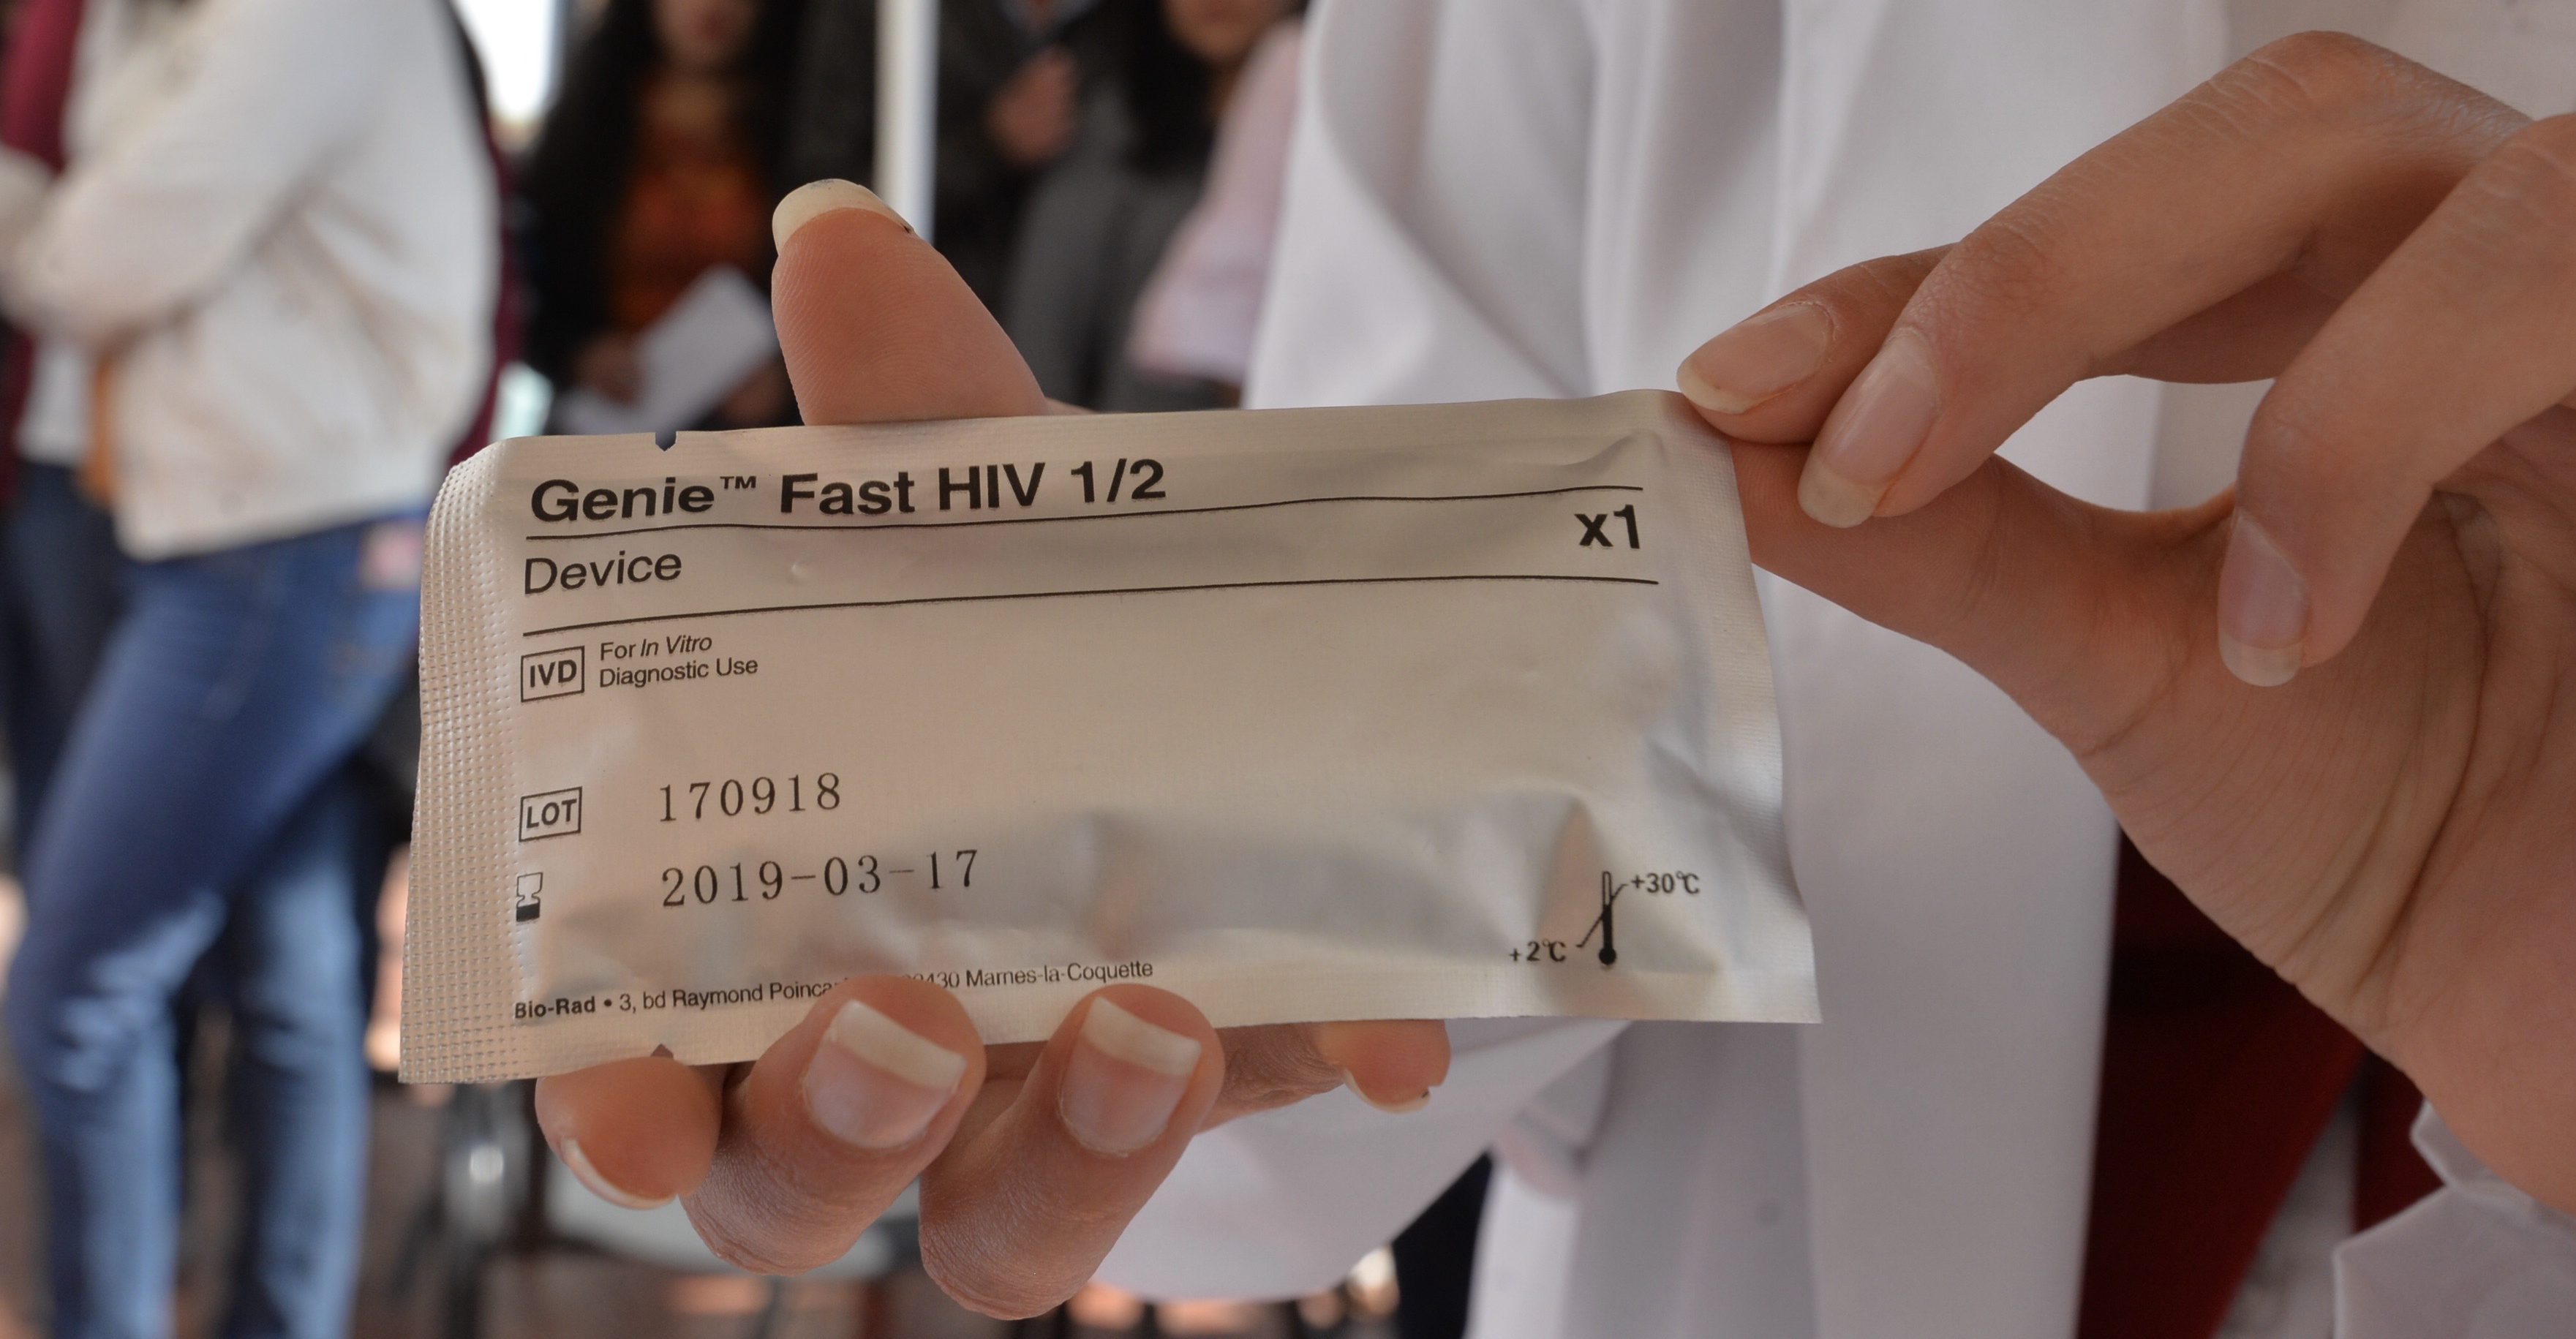 NGOs and HIV patients denounce new shortages of antiretroviral drugs